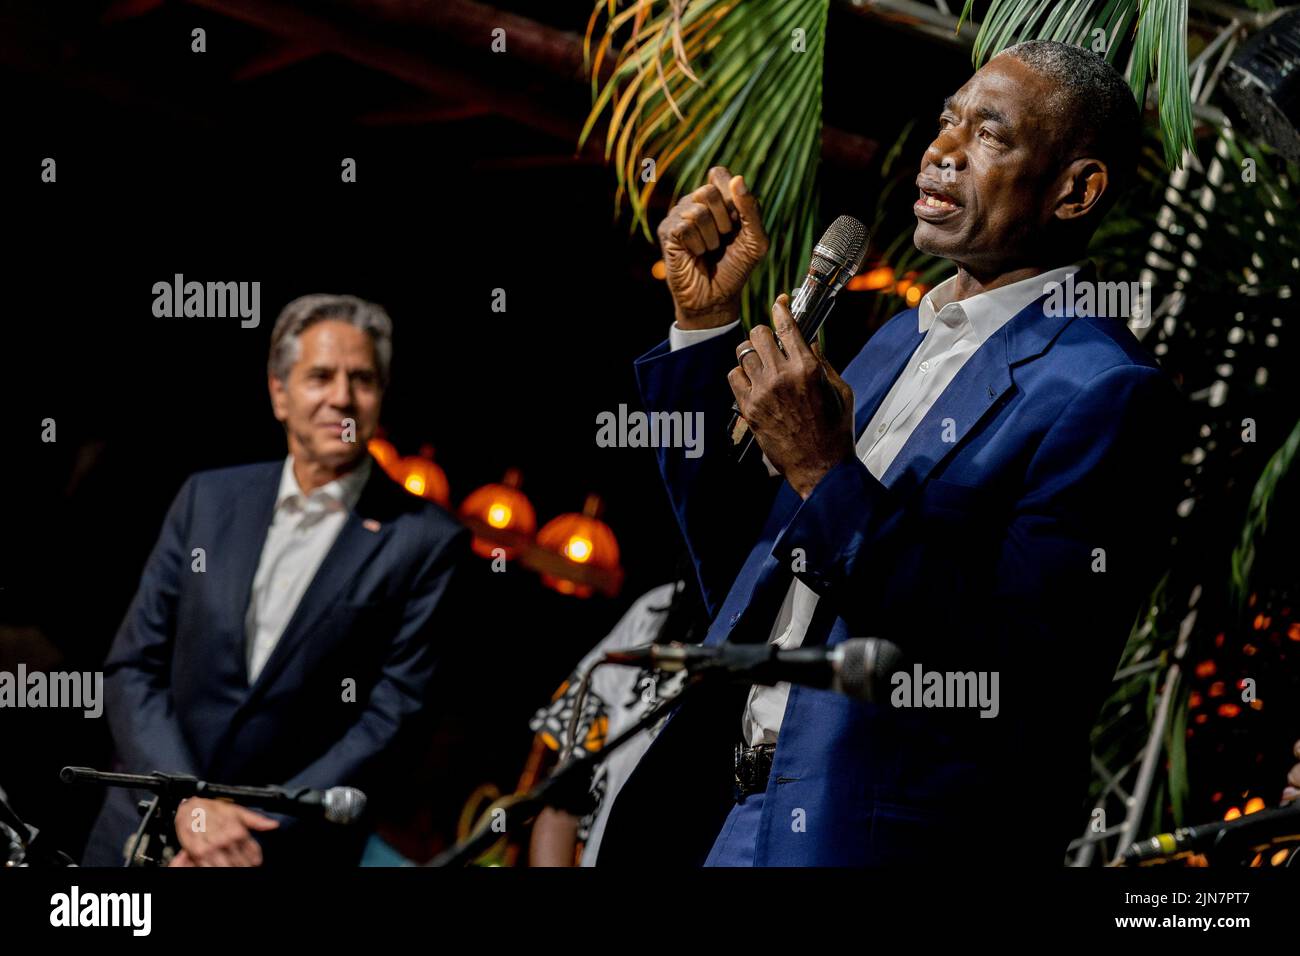 Former NBA basketball superstar and Congo native Dikembe Mutombo, accompanied by U.S. Secretary of State Antony Blinken, takes the stage with the “Rainbow Band” to say a few words at Villa Kilimanjaro in Kinshasa, Democratic Republic of the Congo, August 9, 2022. Andrew Harnik/Pool via REUTERS Stock Photo